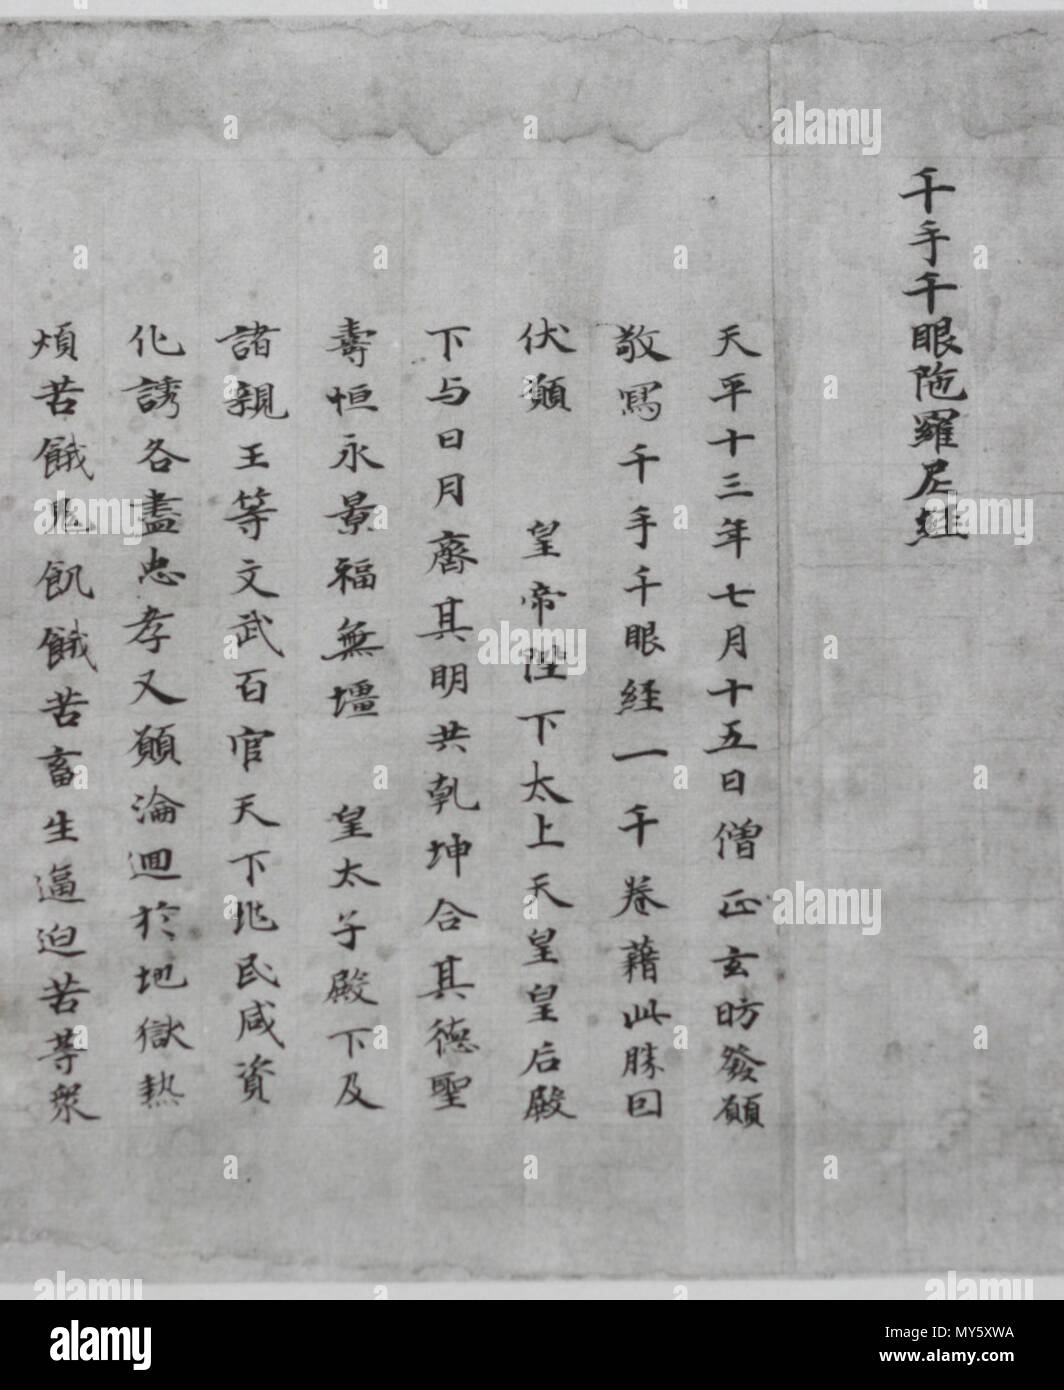 . English: Last part. ACE741, Total scroll is a segment of the Senju sengen daranikyo Sutra, ACE741 Only extant portion of one thousand copies of the Senju sengen daranikyo made under sponsorship of bishop Genbo. Mentioned in the Essential Records of Todai-ji. 109lines, opening part is lost. Kyoto National Museum, Kyoto, Japan 日本語: 千手千眼陀羅尼経、残巻、旧守屋孝蔵コレクション、京都国立博物館 . ACE741. Unknown 481 Senjyu Sengan Daranhi Kyohaku Stock Photo